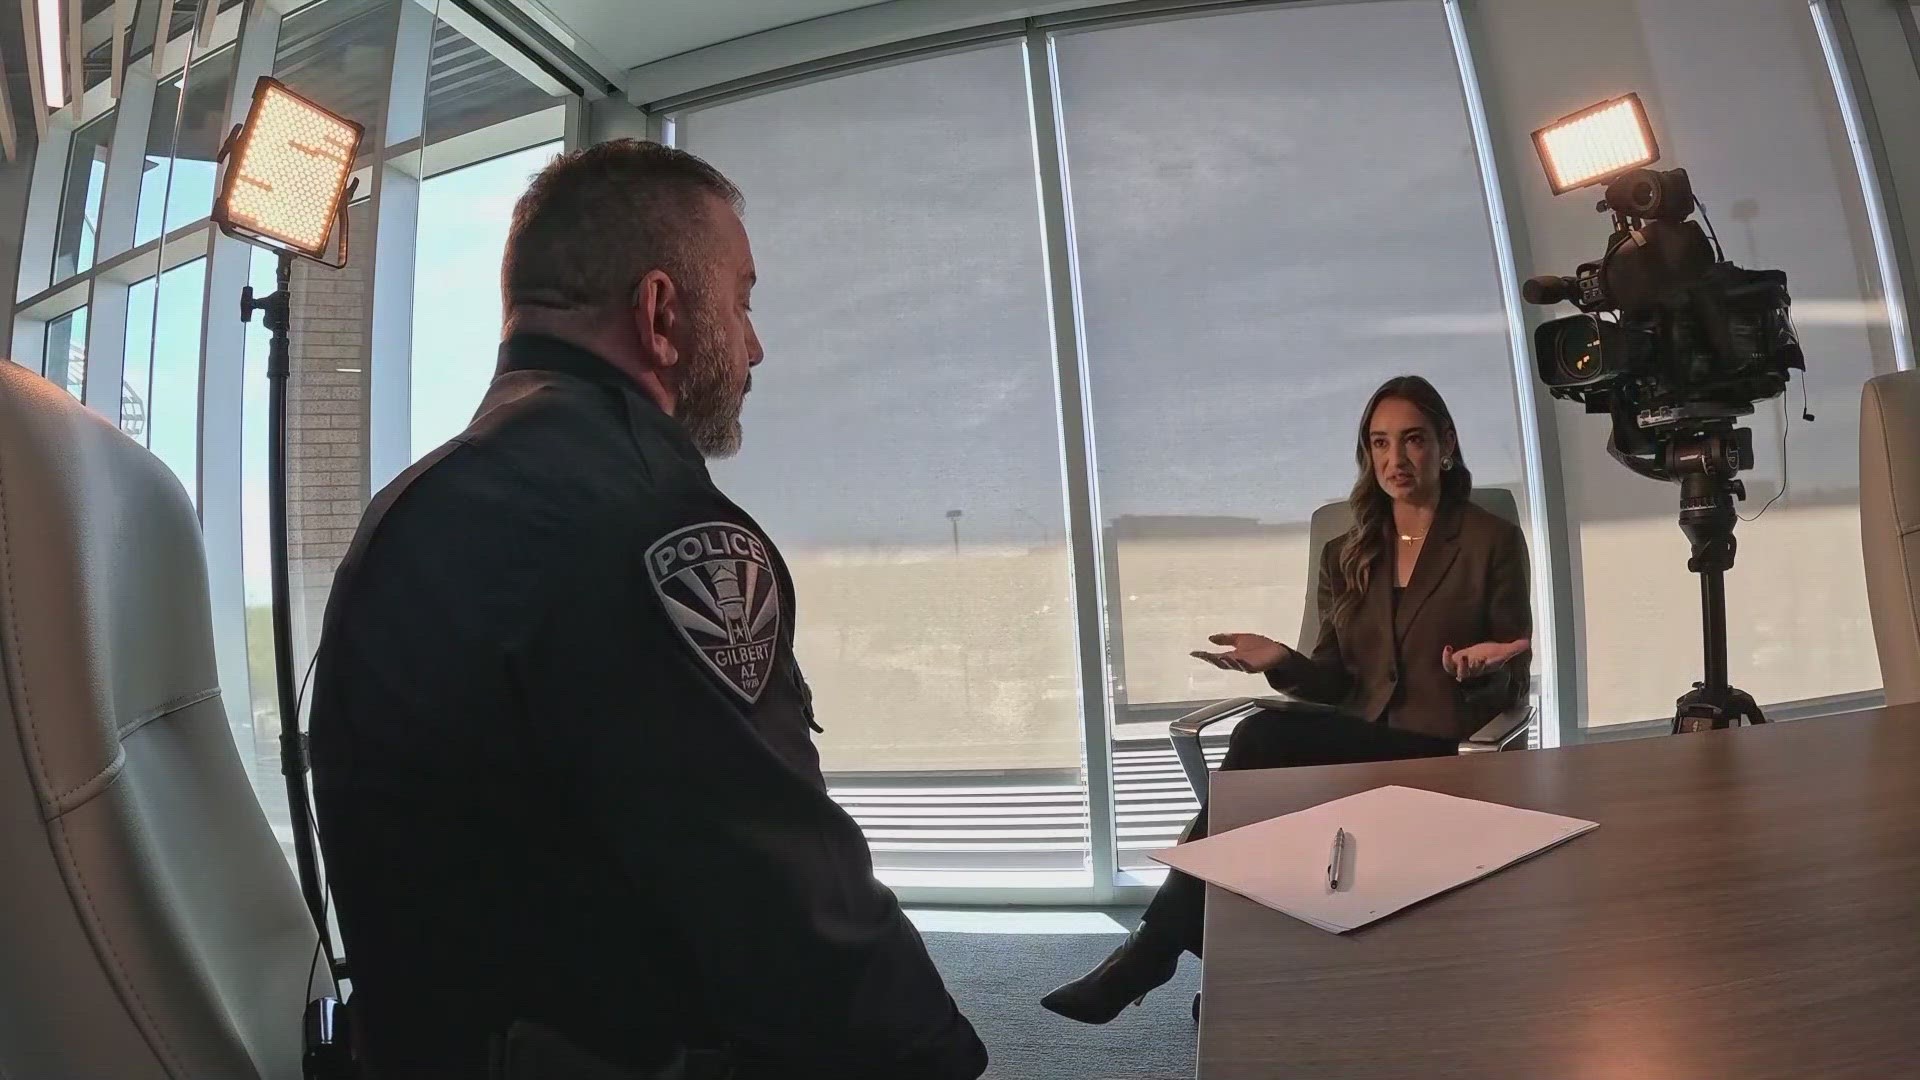 12News spoke with police chiefs from both Gilbert and Queen Creek to discuss trends in teen violence.